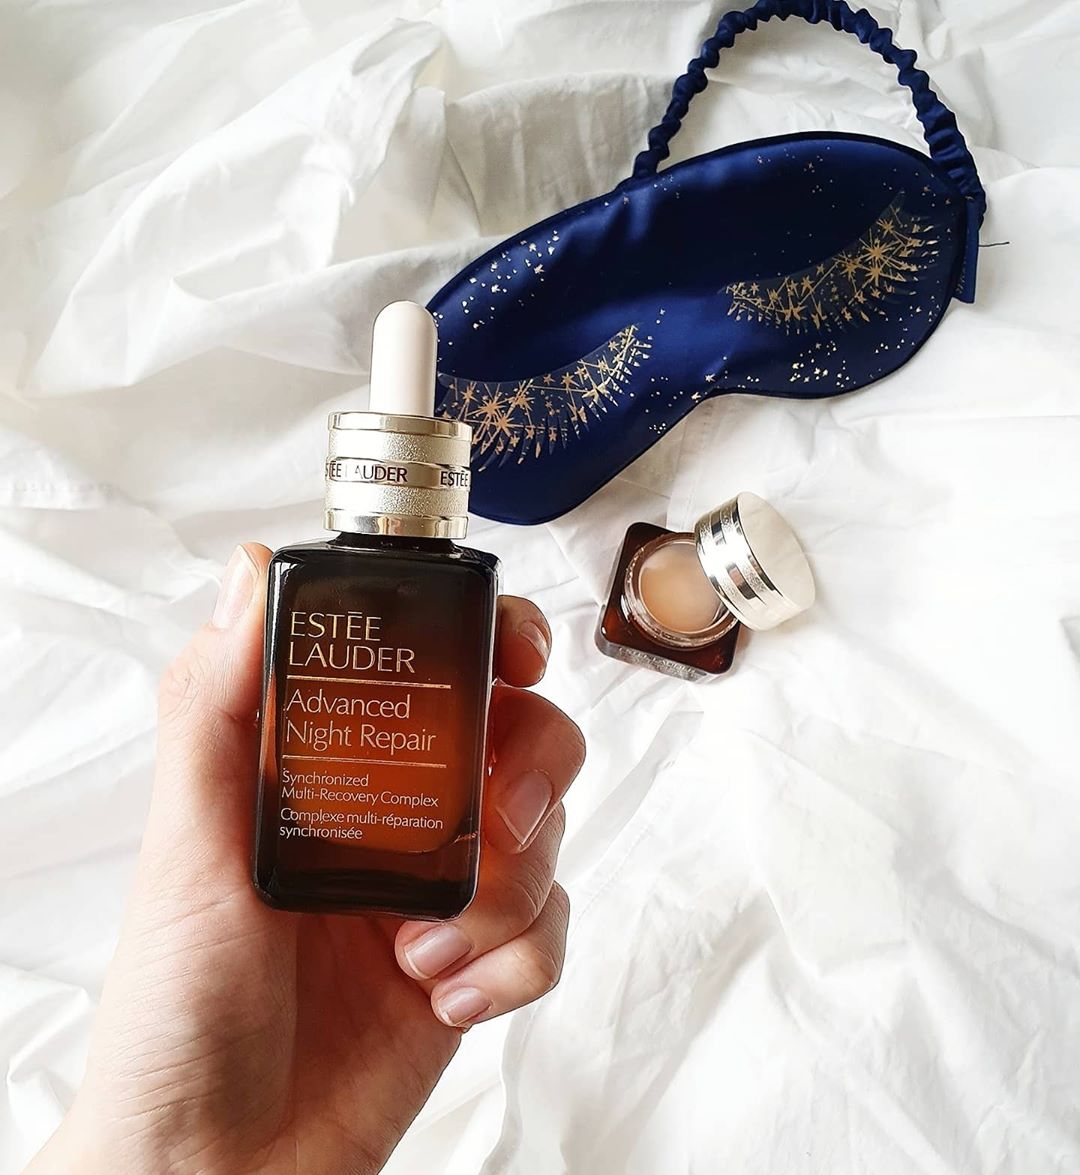 Estée Lauder - Long week? 😴 This #FutureSkinFriday, pull up the covers & wind down for the weekend with NEW Advanced Night Repair serum and Eye Supercharged Complex! This skincare #powerpair helps pr...